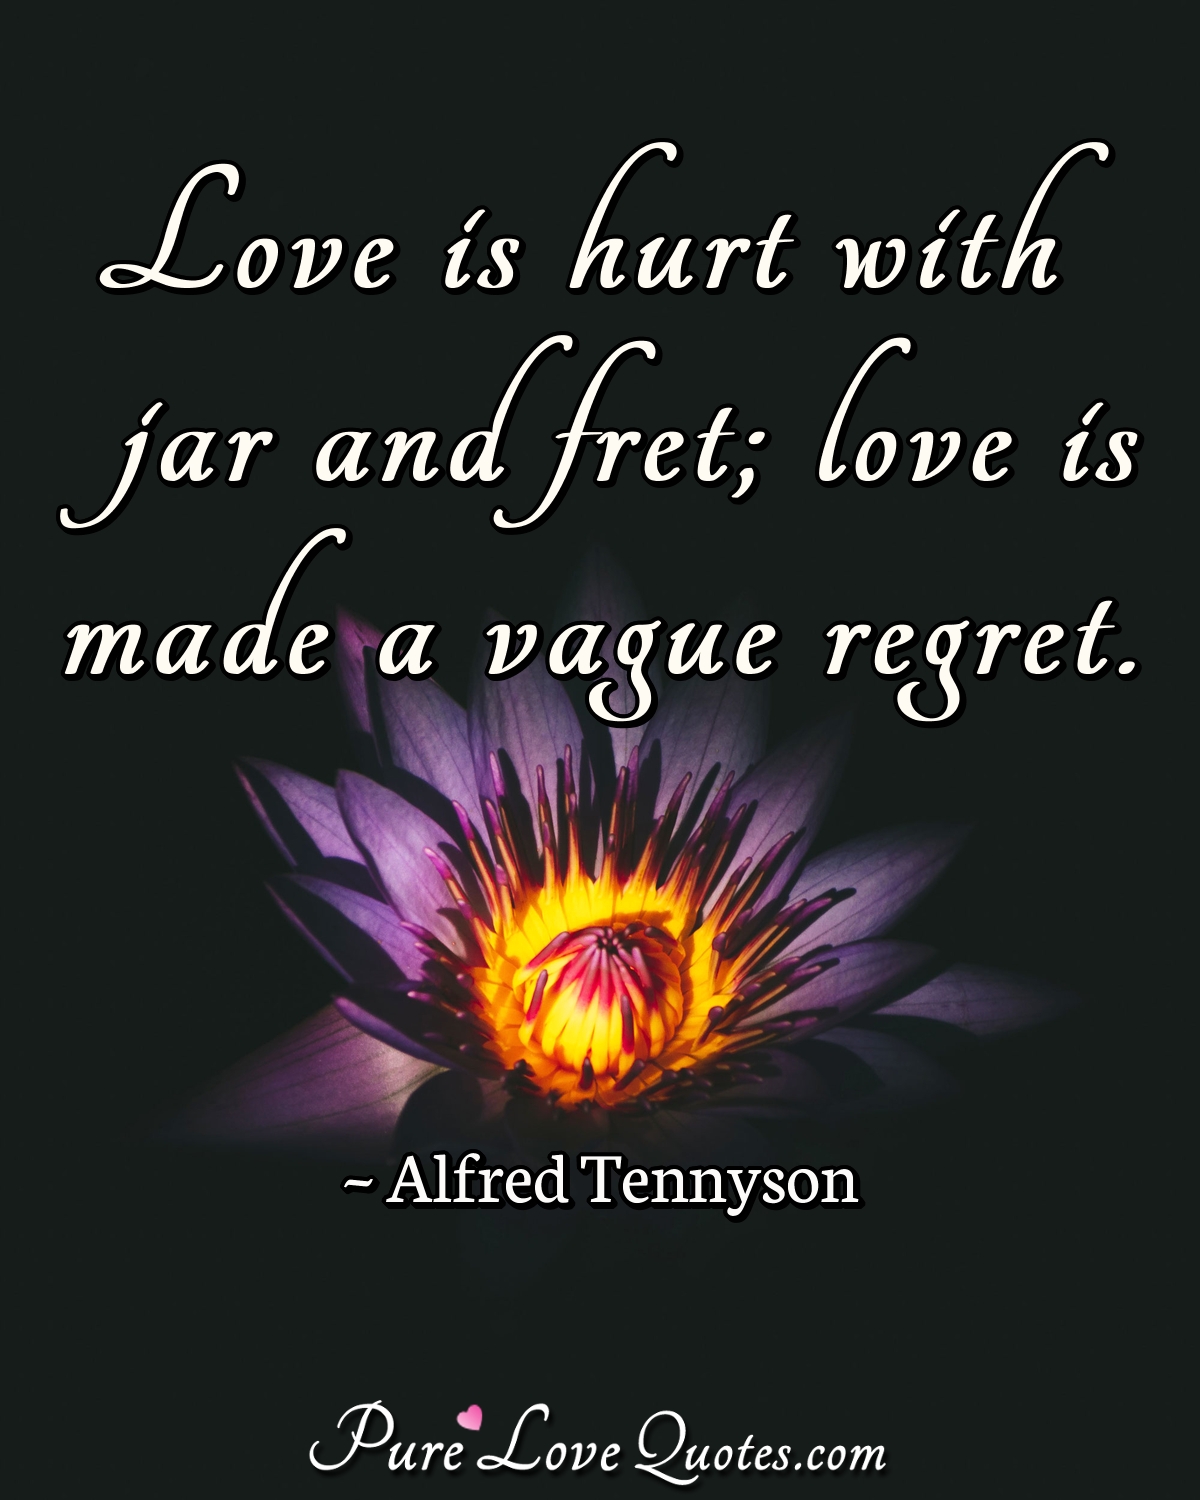 Love is hurt with jar and fret; love is made a vague regret. - Alfred Tennyson